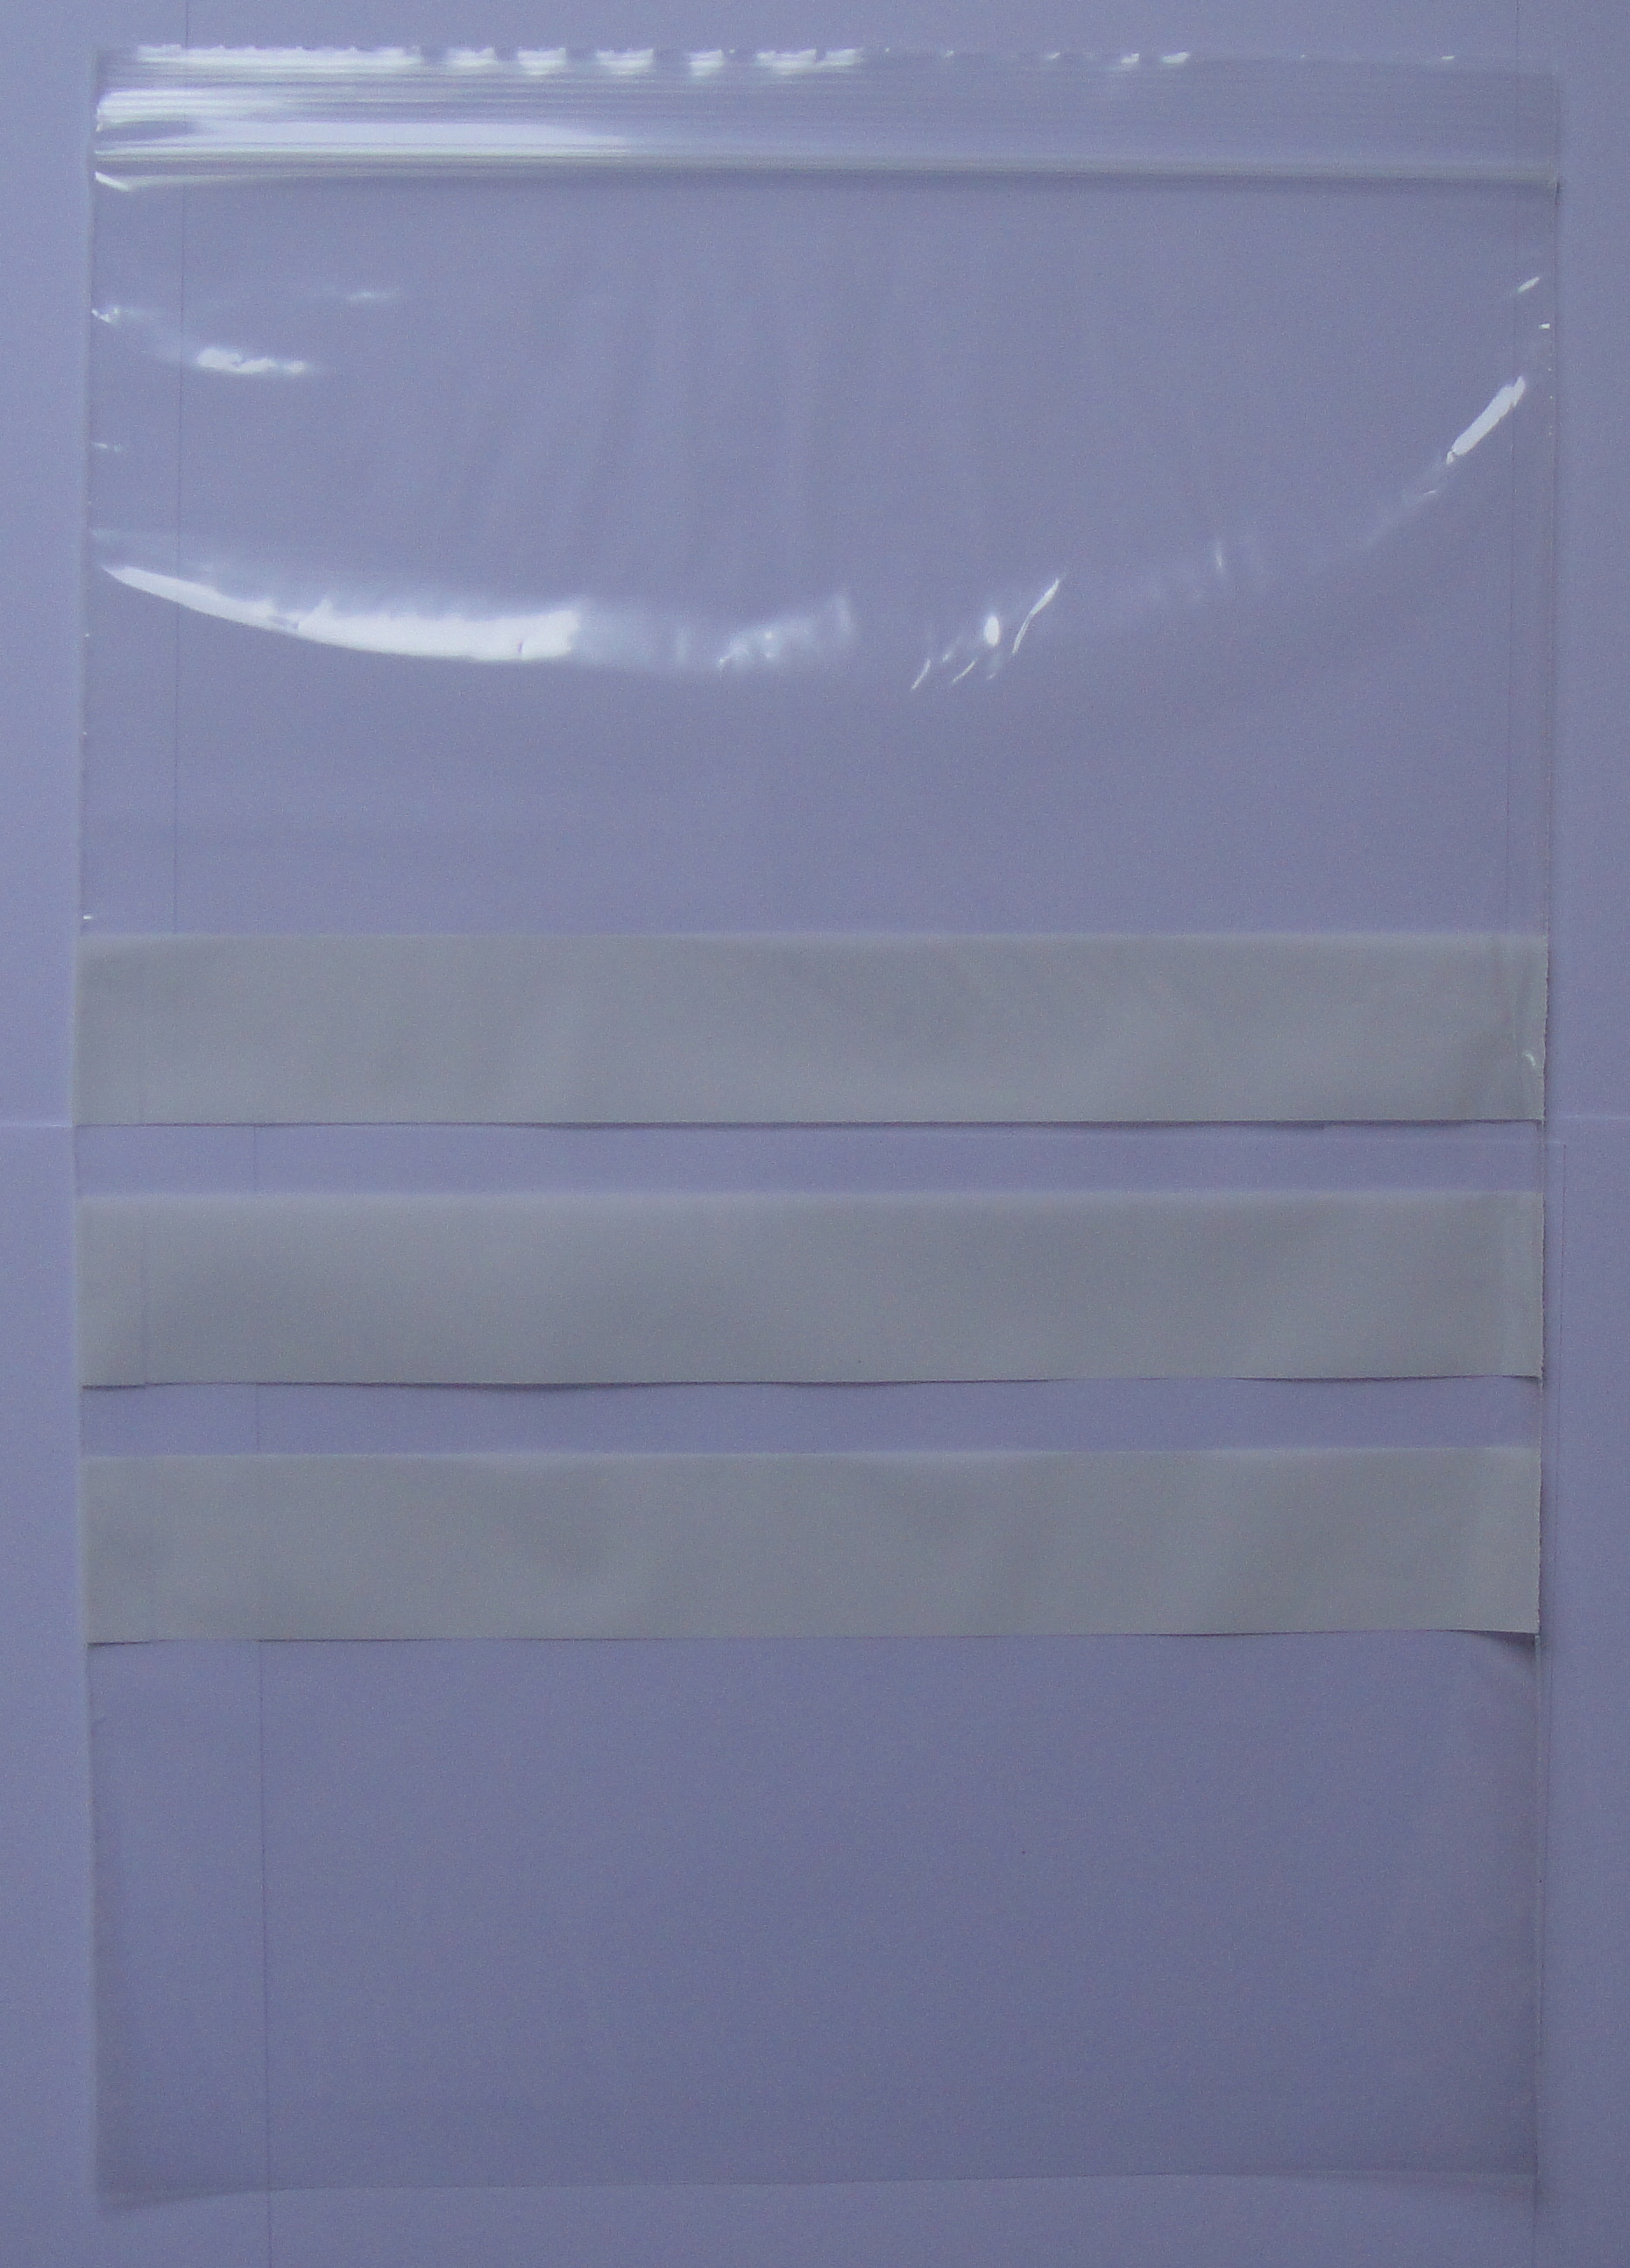 5000 PLASTIC RESEALABLE GRIP SEAL BAGS 2.25 x 3 